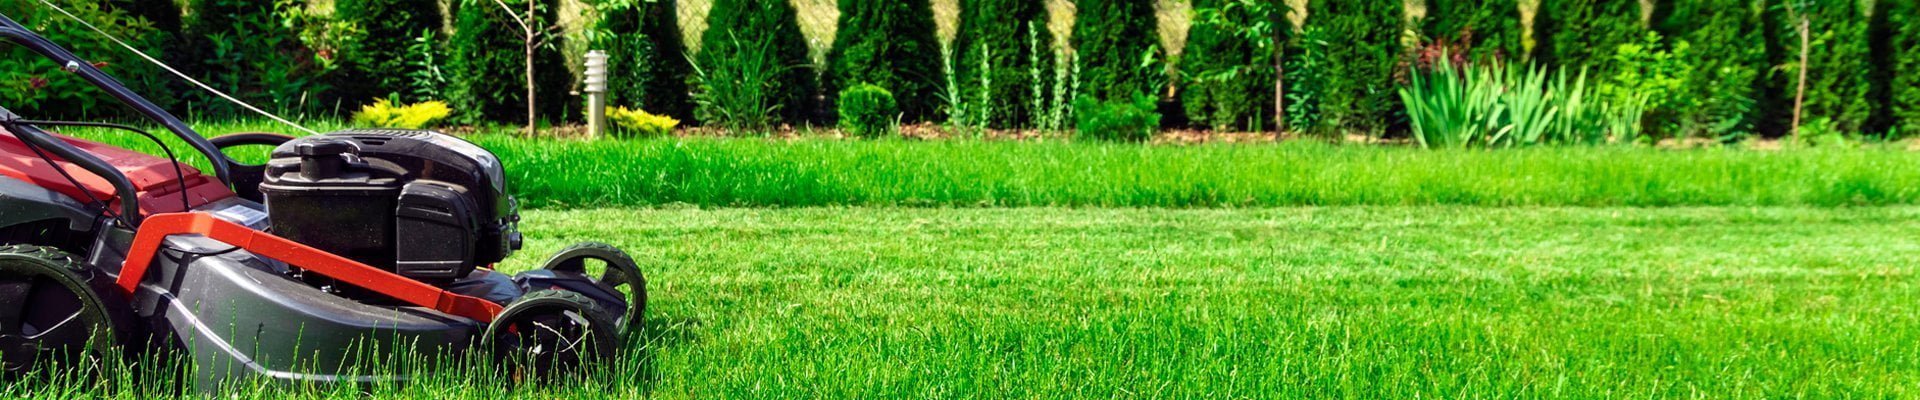 Residential Lawn Mowing & Grass Cutting Services In Whitby & Durham Region